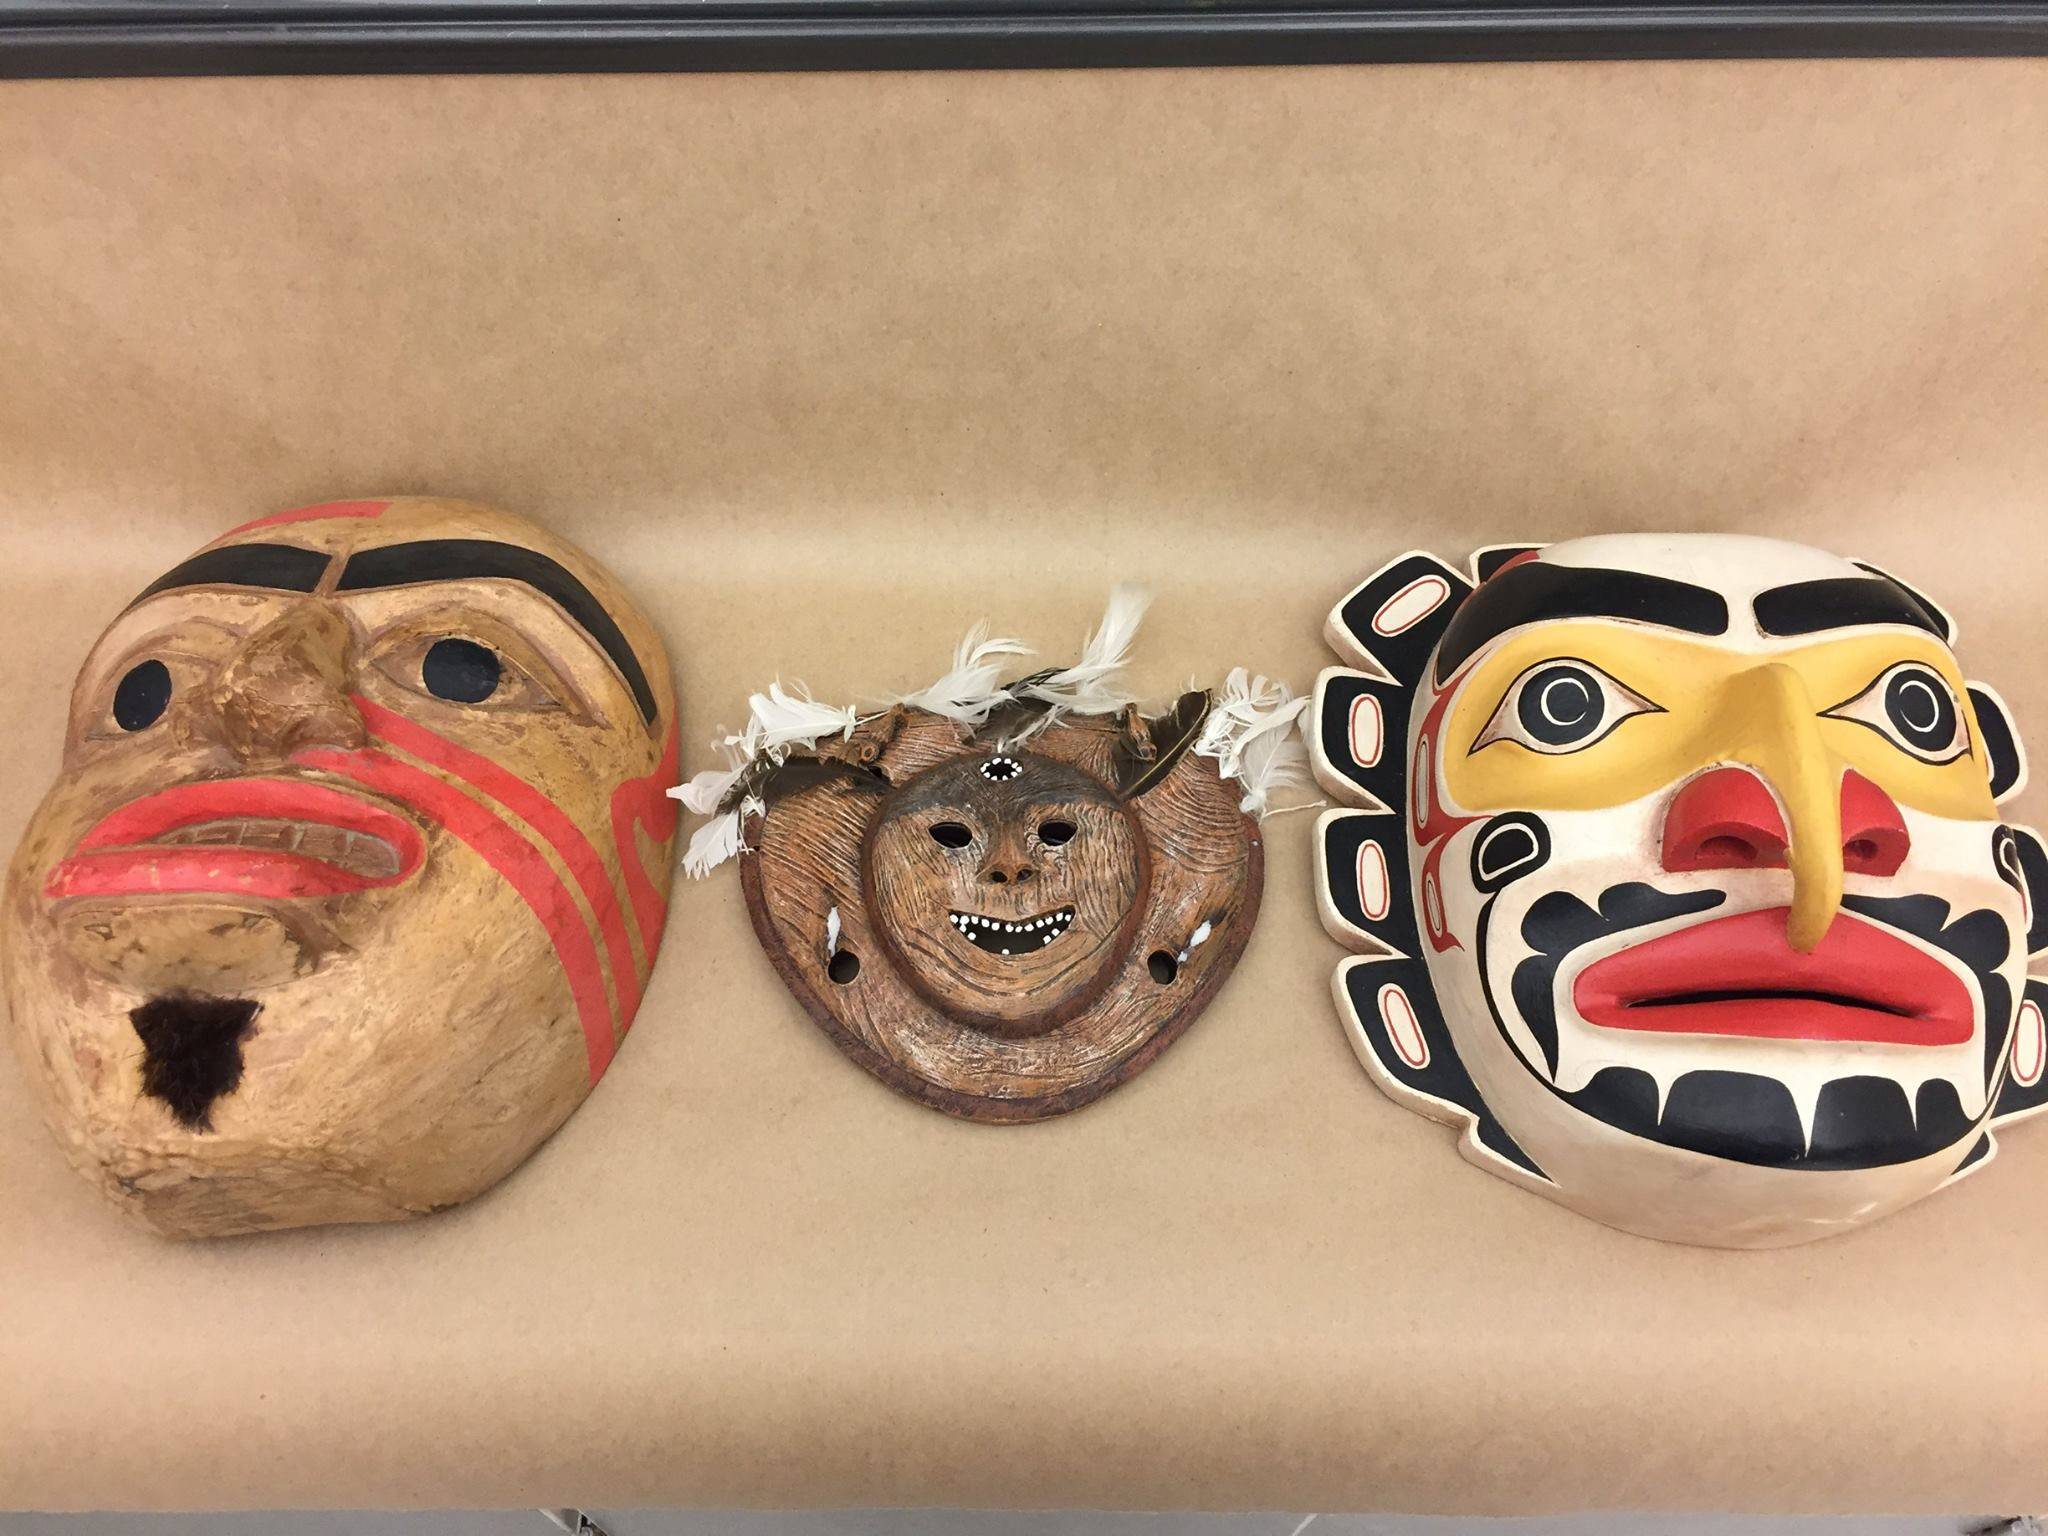 These Native Alaskan-style masks were recovered from an impounded vehicle by the Juneau Police Department. While these might be mass-produced knockoffs of popular masks, good authentic pieces would be worth in the vicinity of $900 to a few thousand dollars, said an employee of Mt. Juneau Trading Post.